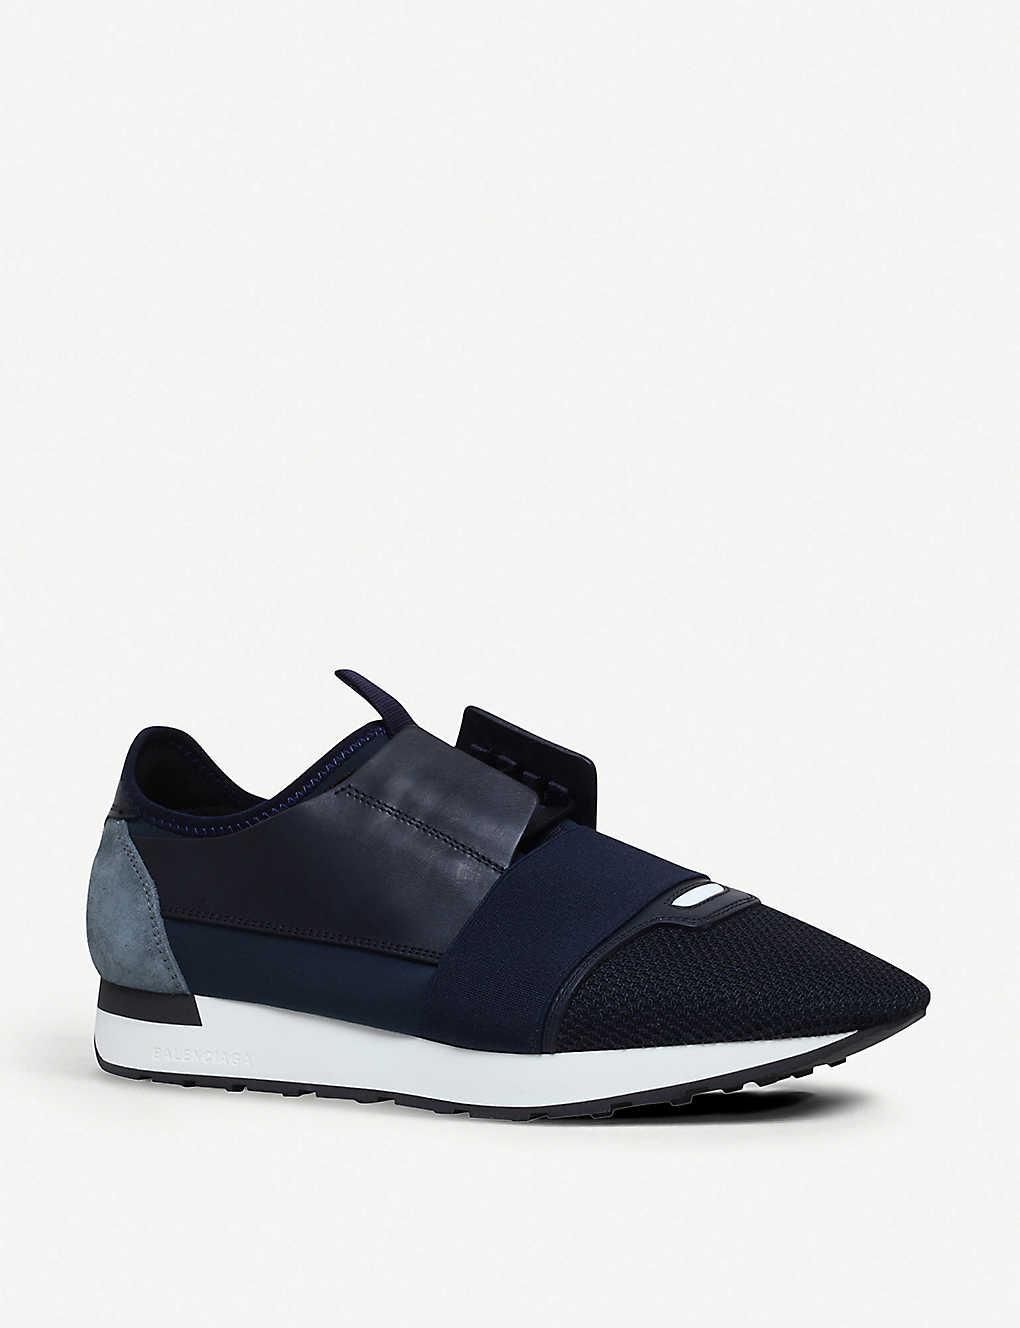 Balenciaga Race Runners Leather, Suede And Mesh Trainers in Navy (Blue ...